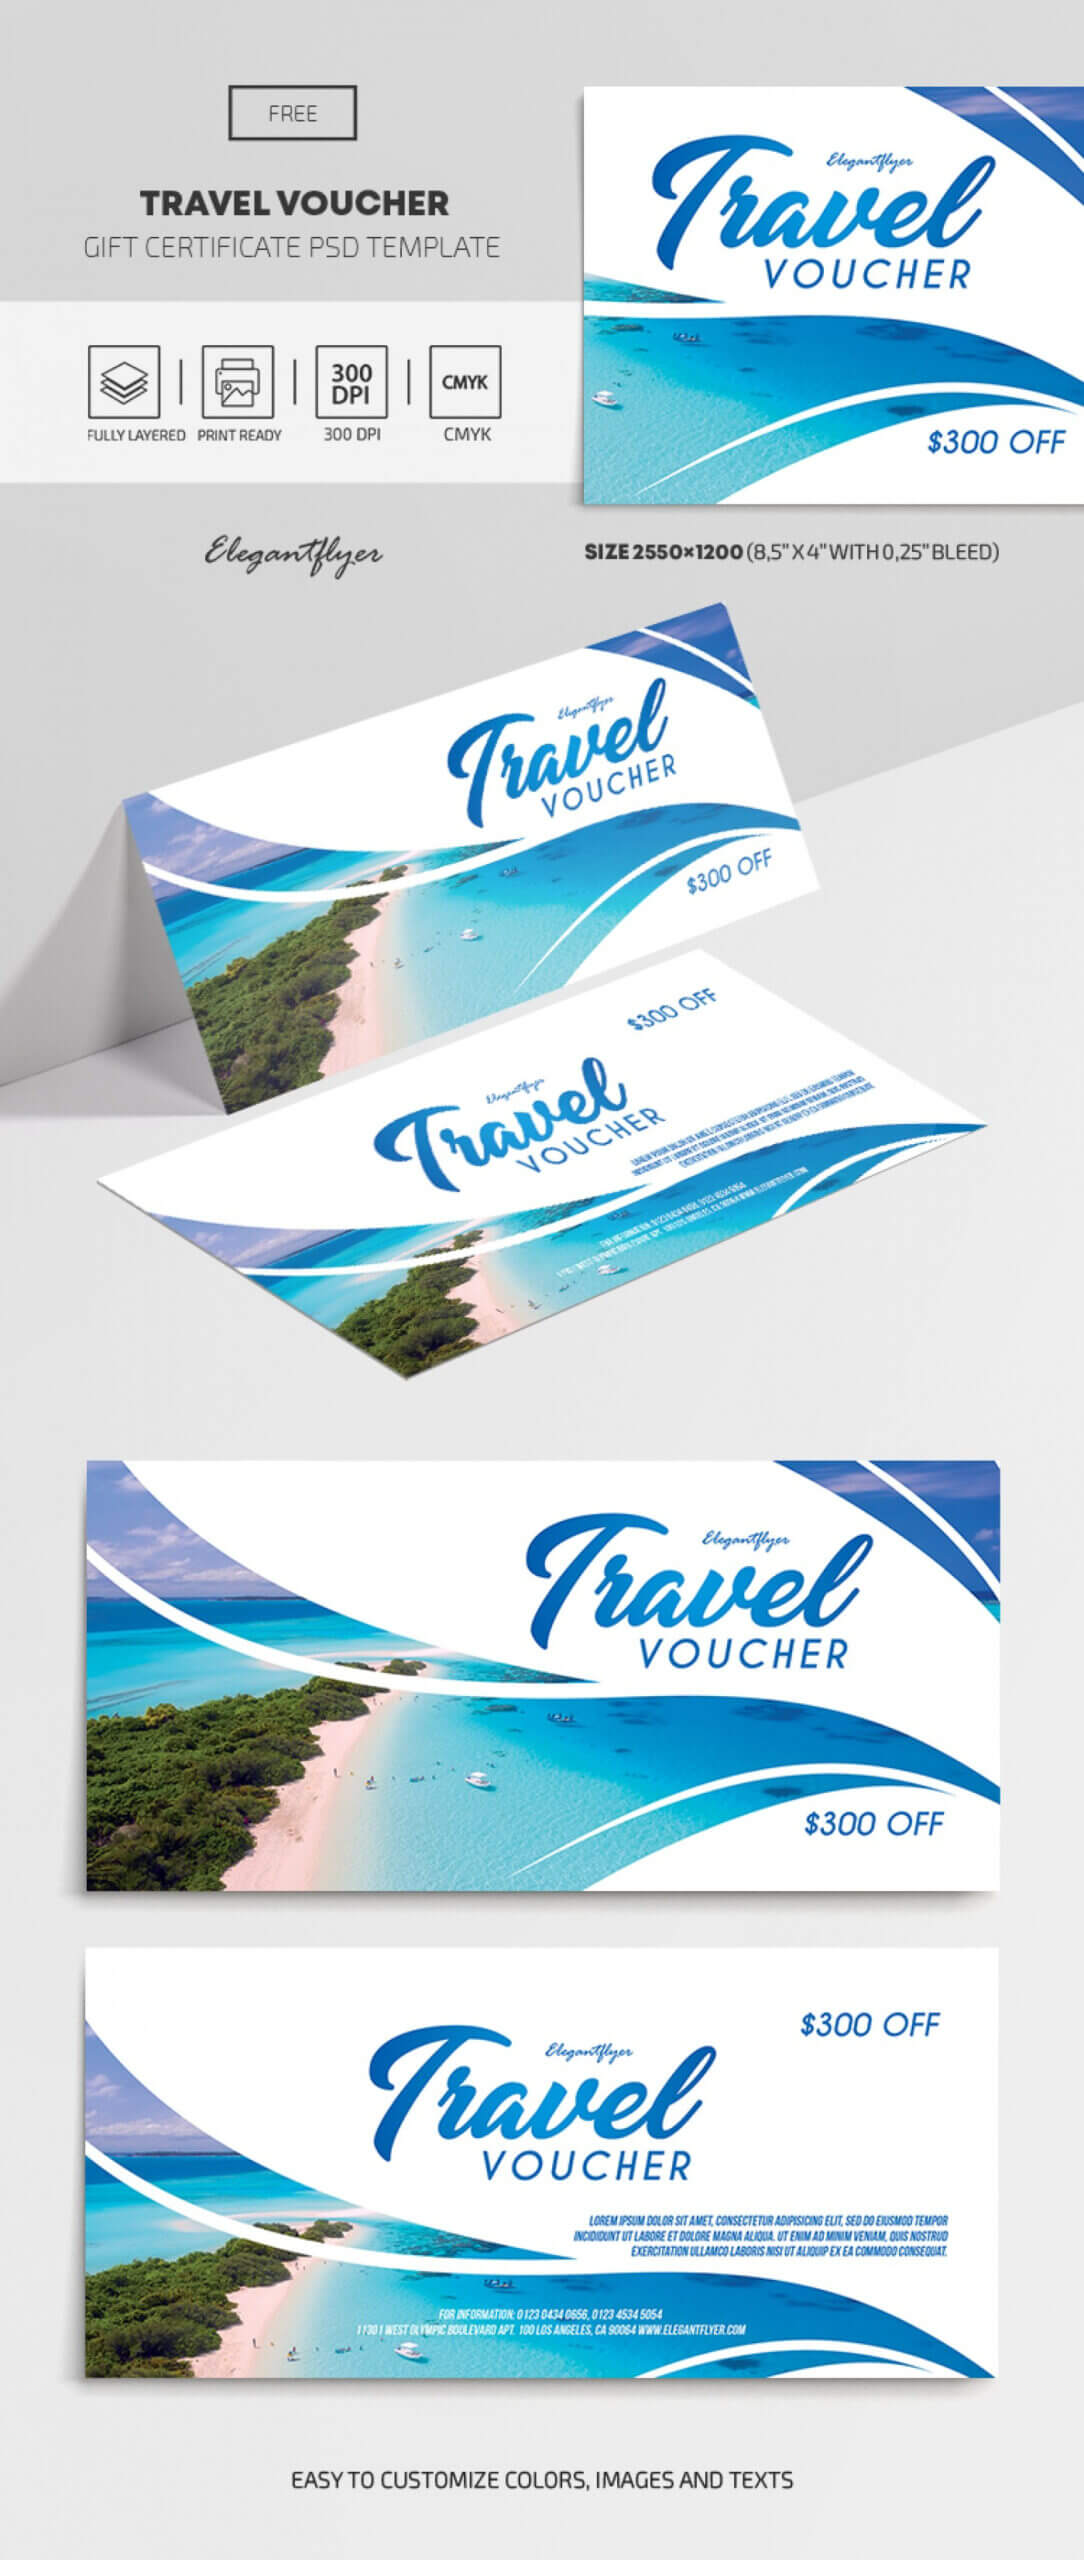 026 Template Ideas Travel Gift Certificate Stirring Free Throughout Free Travel Gift Certificate Template